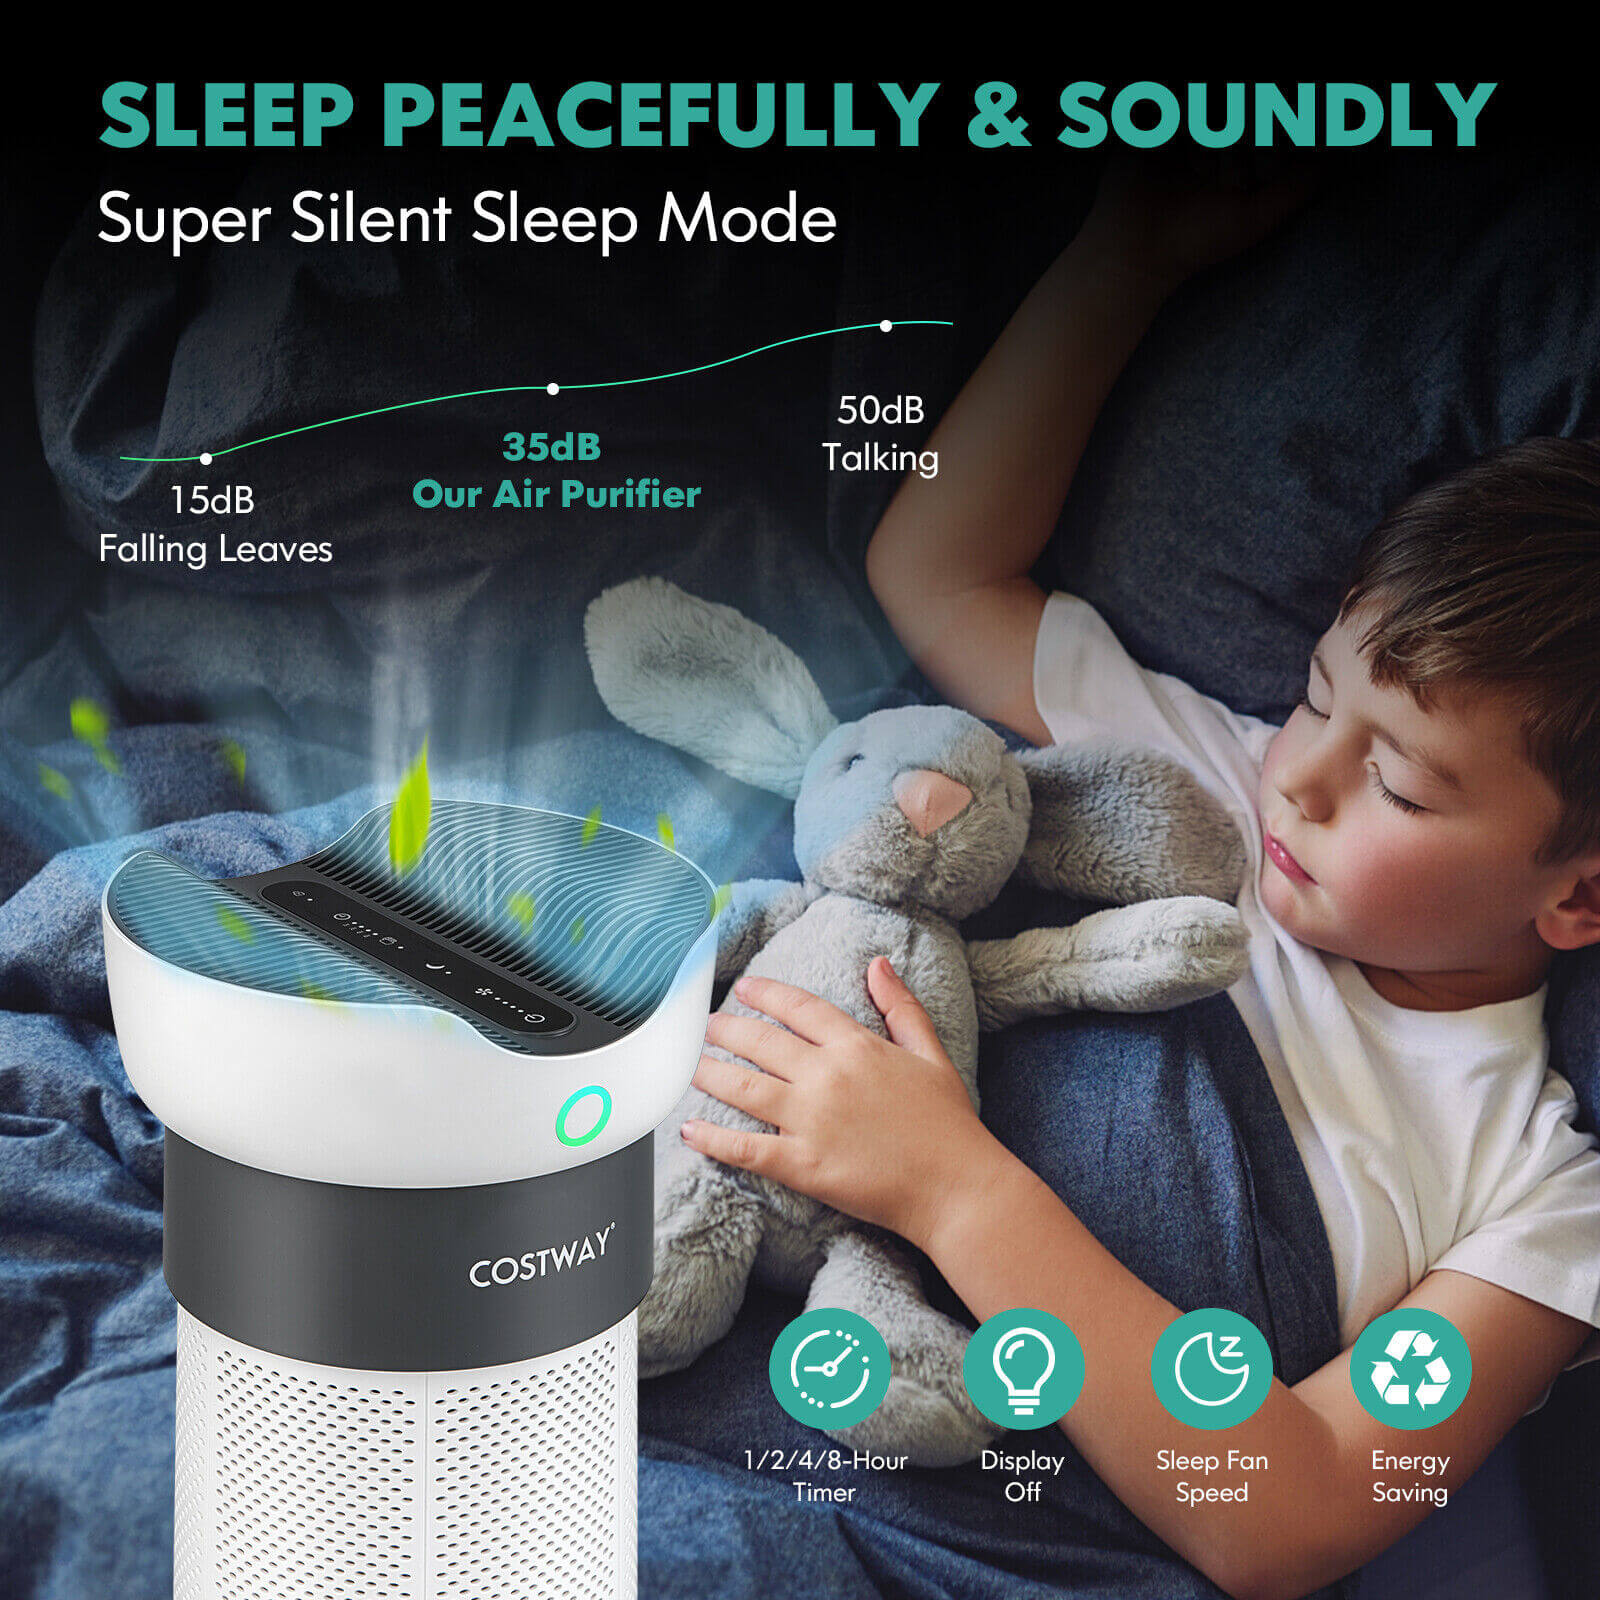 Low Noise and Easy Filter Replacement:  With a noise level as low as 35 dB. This allows you to sleep soundly while enjoying the fresh air. The indicator lights automatically turn off to avoid any discomfort. Additionally, the air purifier is equipped with a filter replacement indicator to remind you when it's time to replace the filter, typically every 3-6 months.